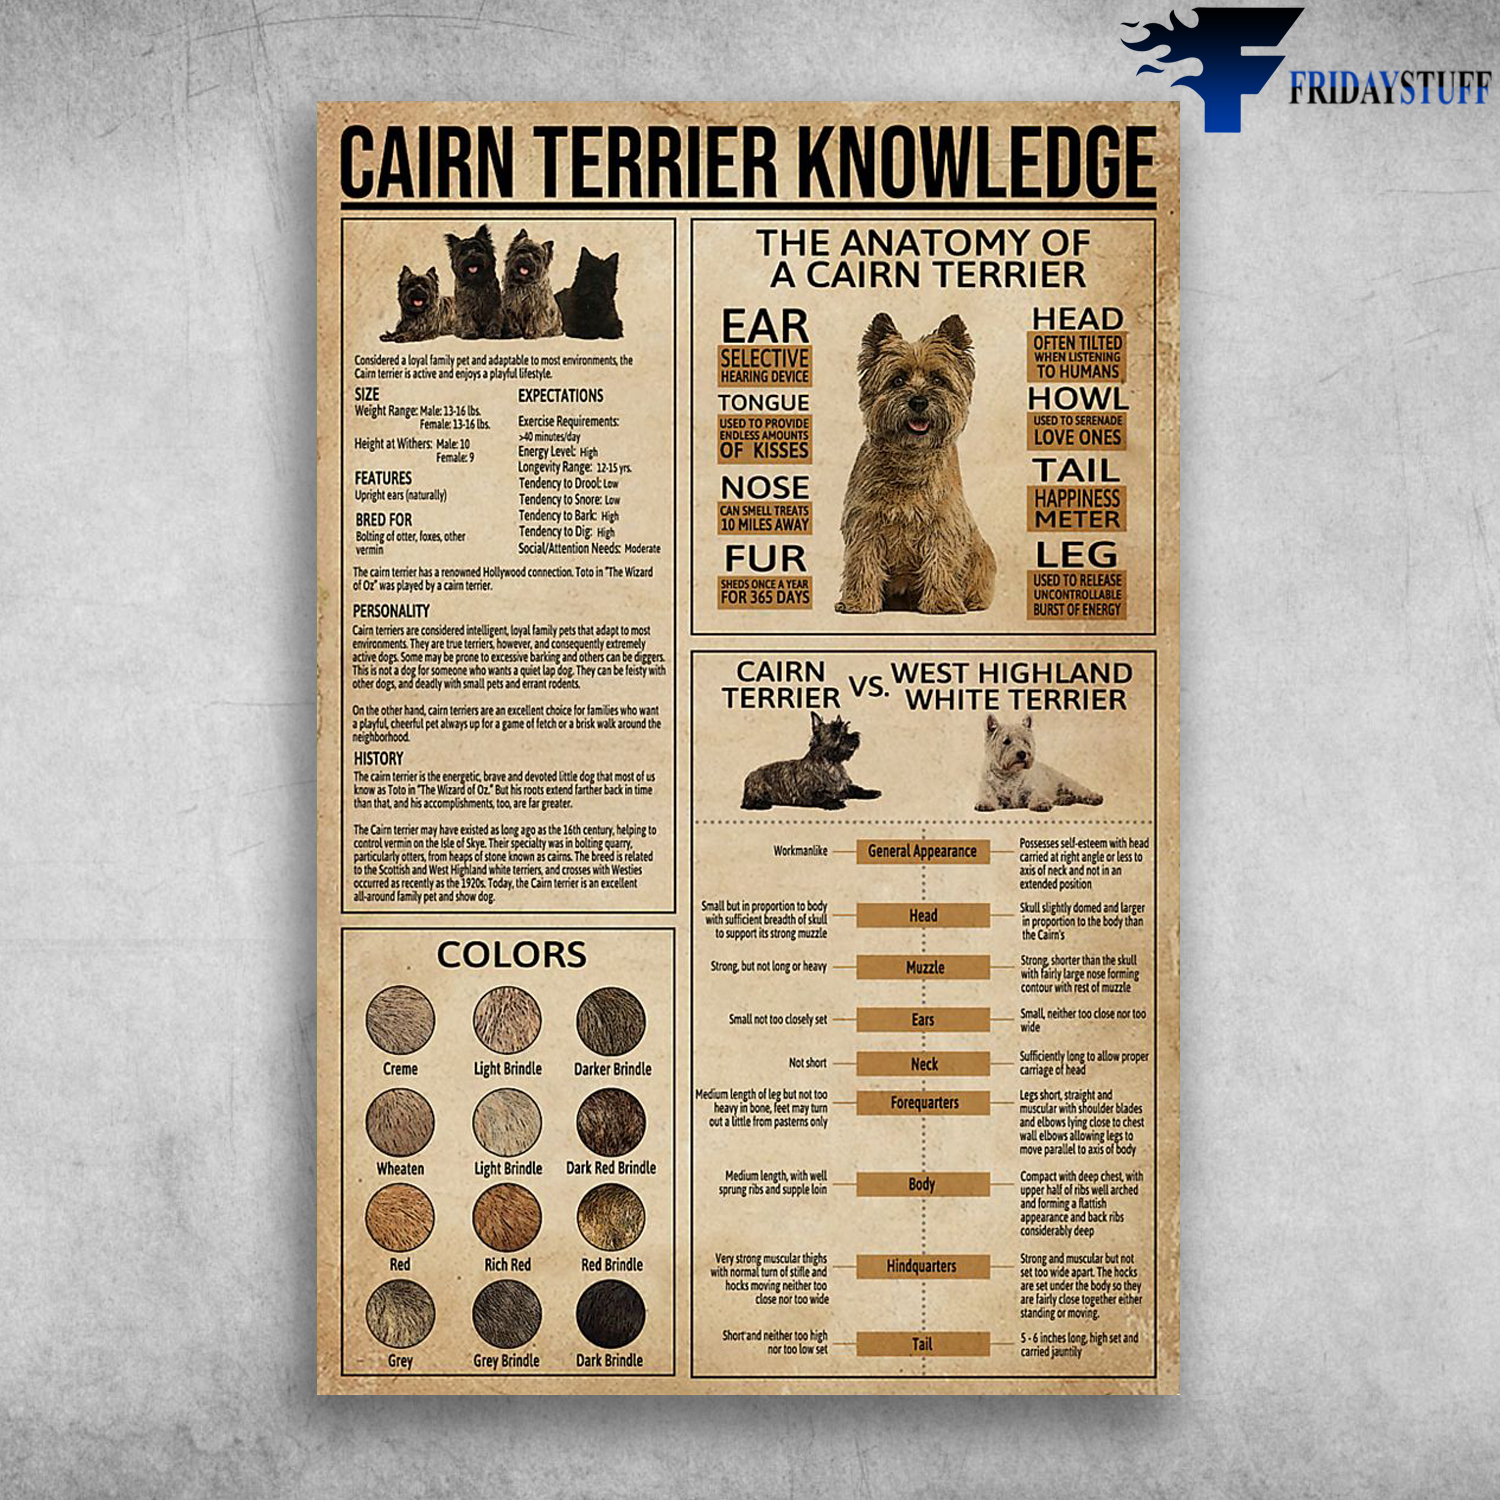 Cairn Terrier Knowledge The Anatomy Of A Cairn Terrier